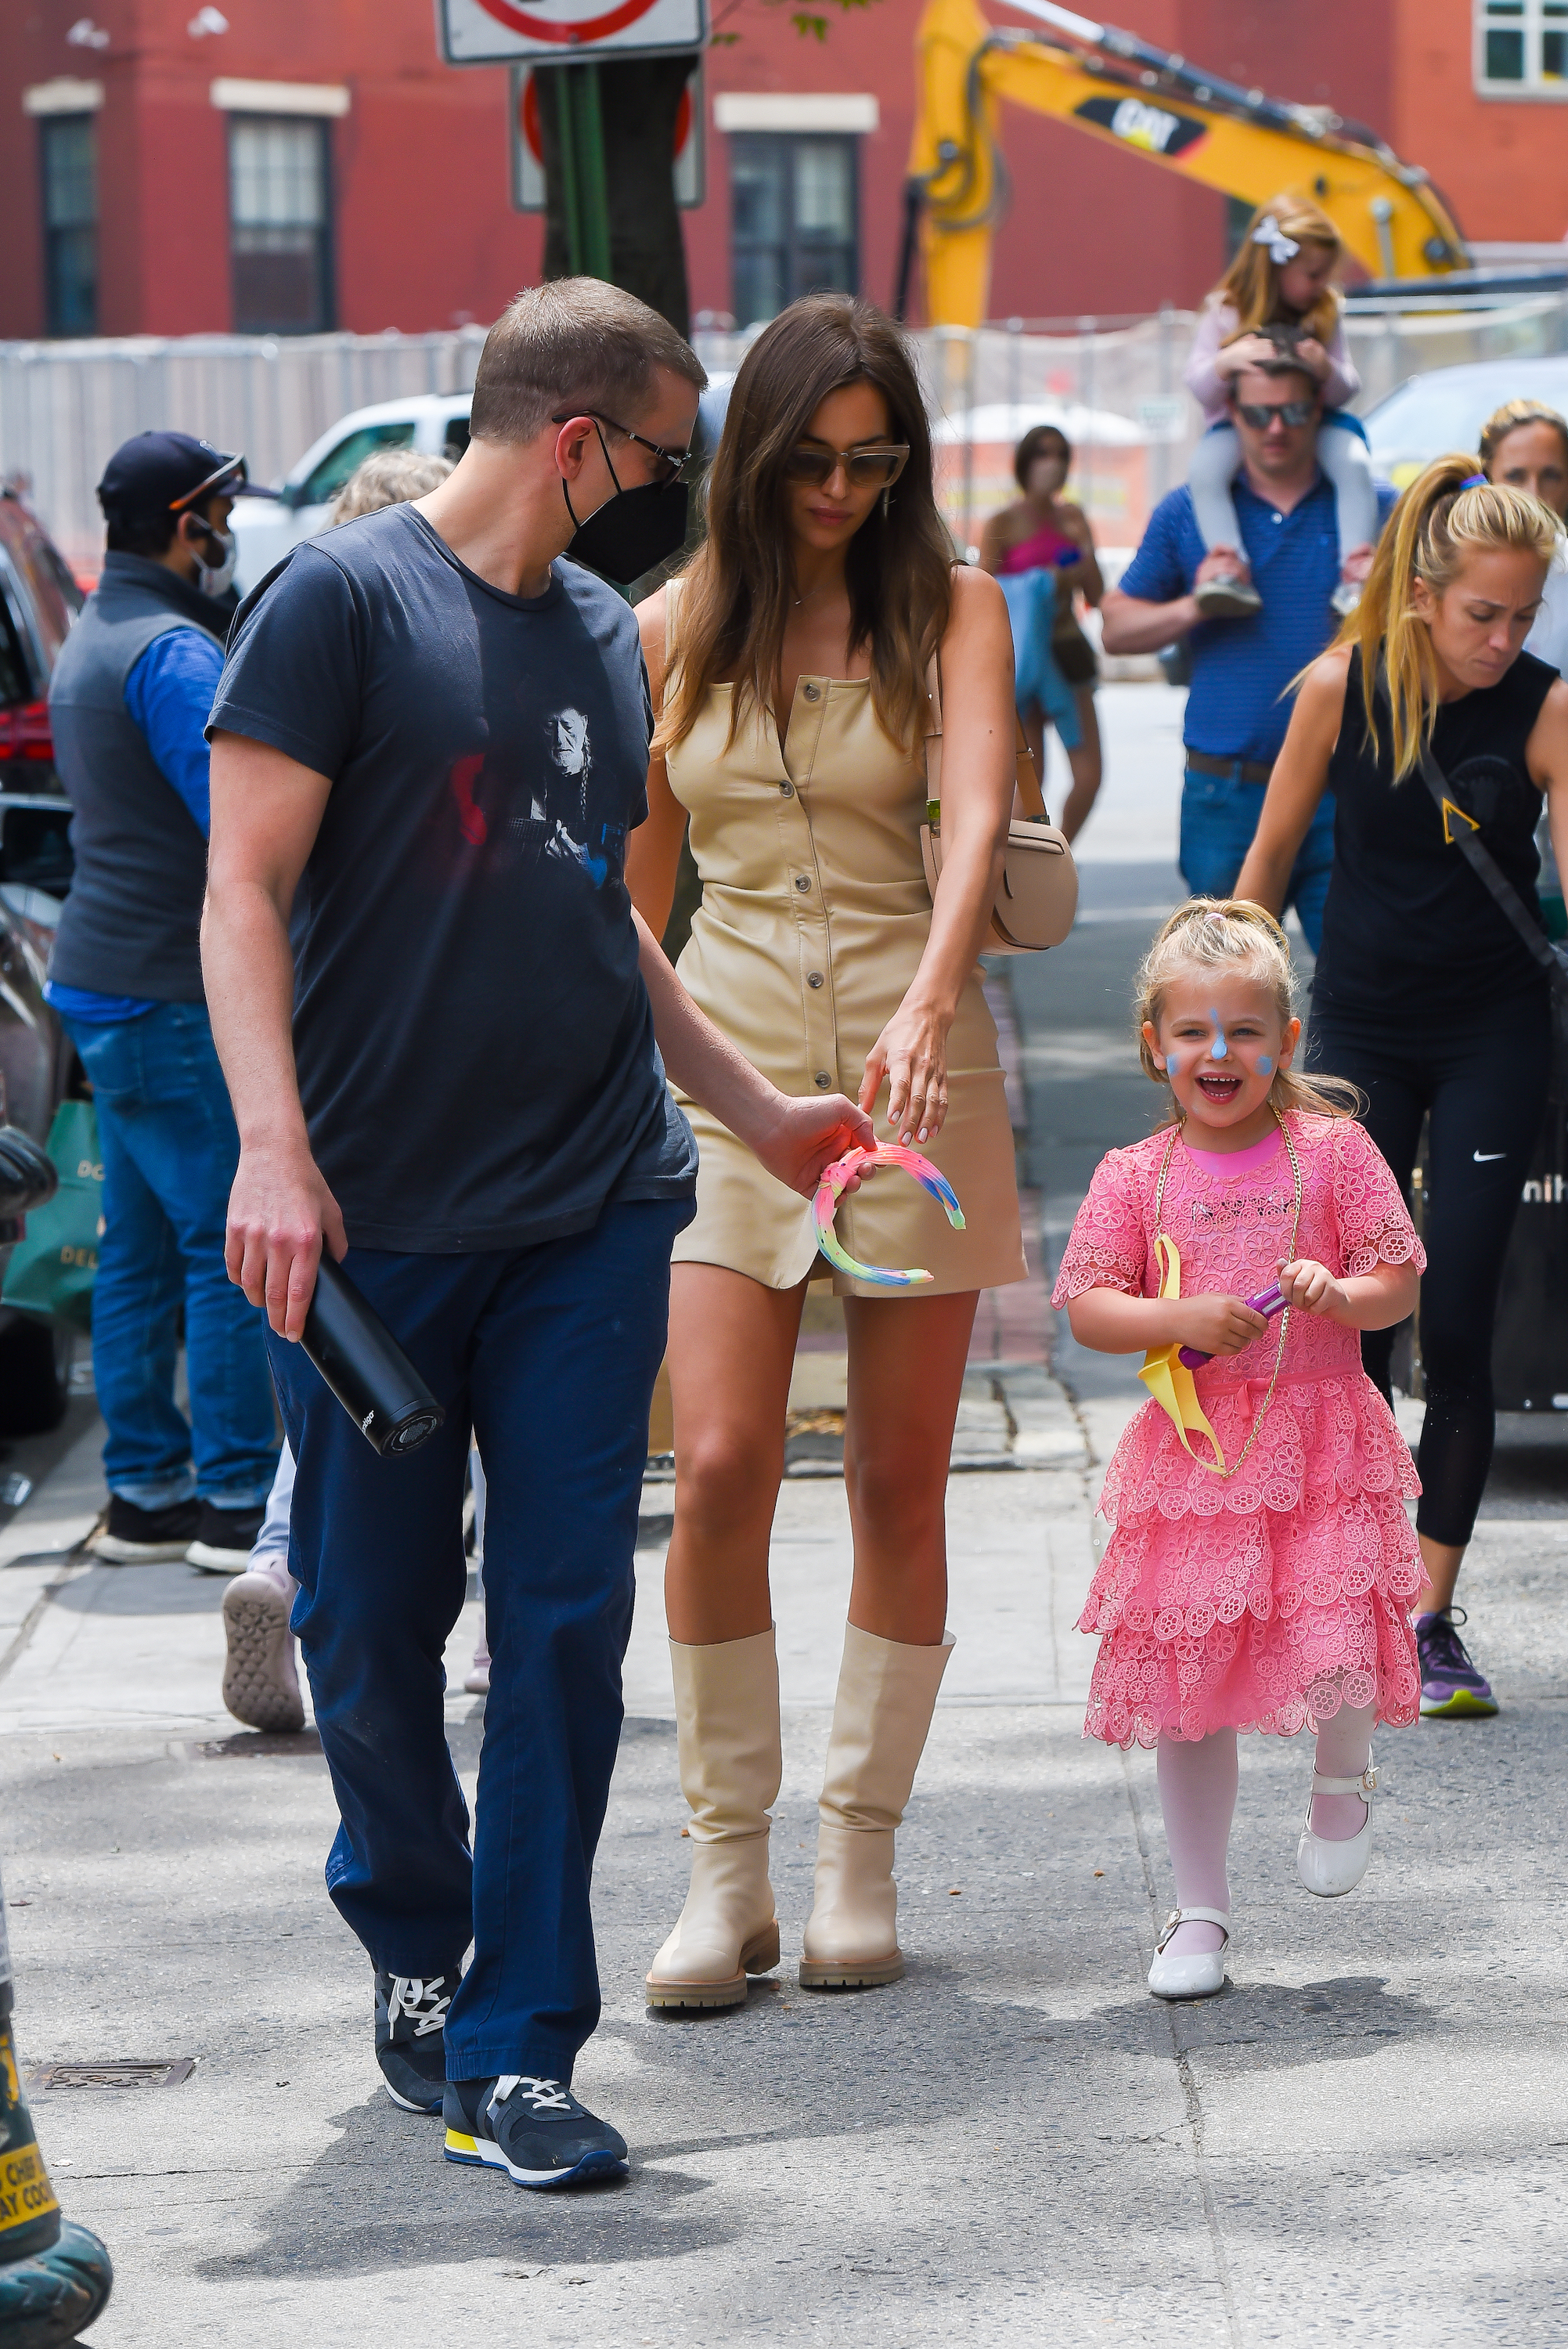 Bradley Cooper, Irina Shayk, and their daughter Lea Cooper seen out in Manhattan on June 2, 2021, in New York City | Source: Getty Images